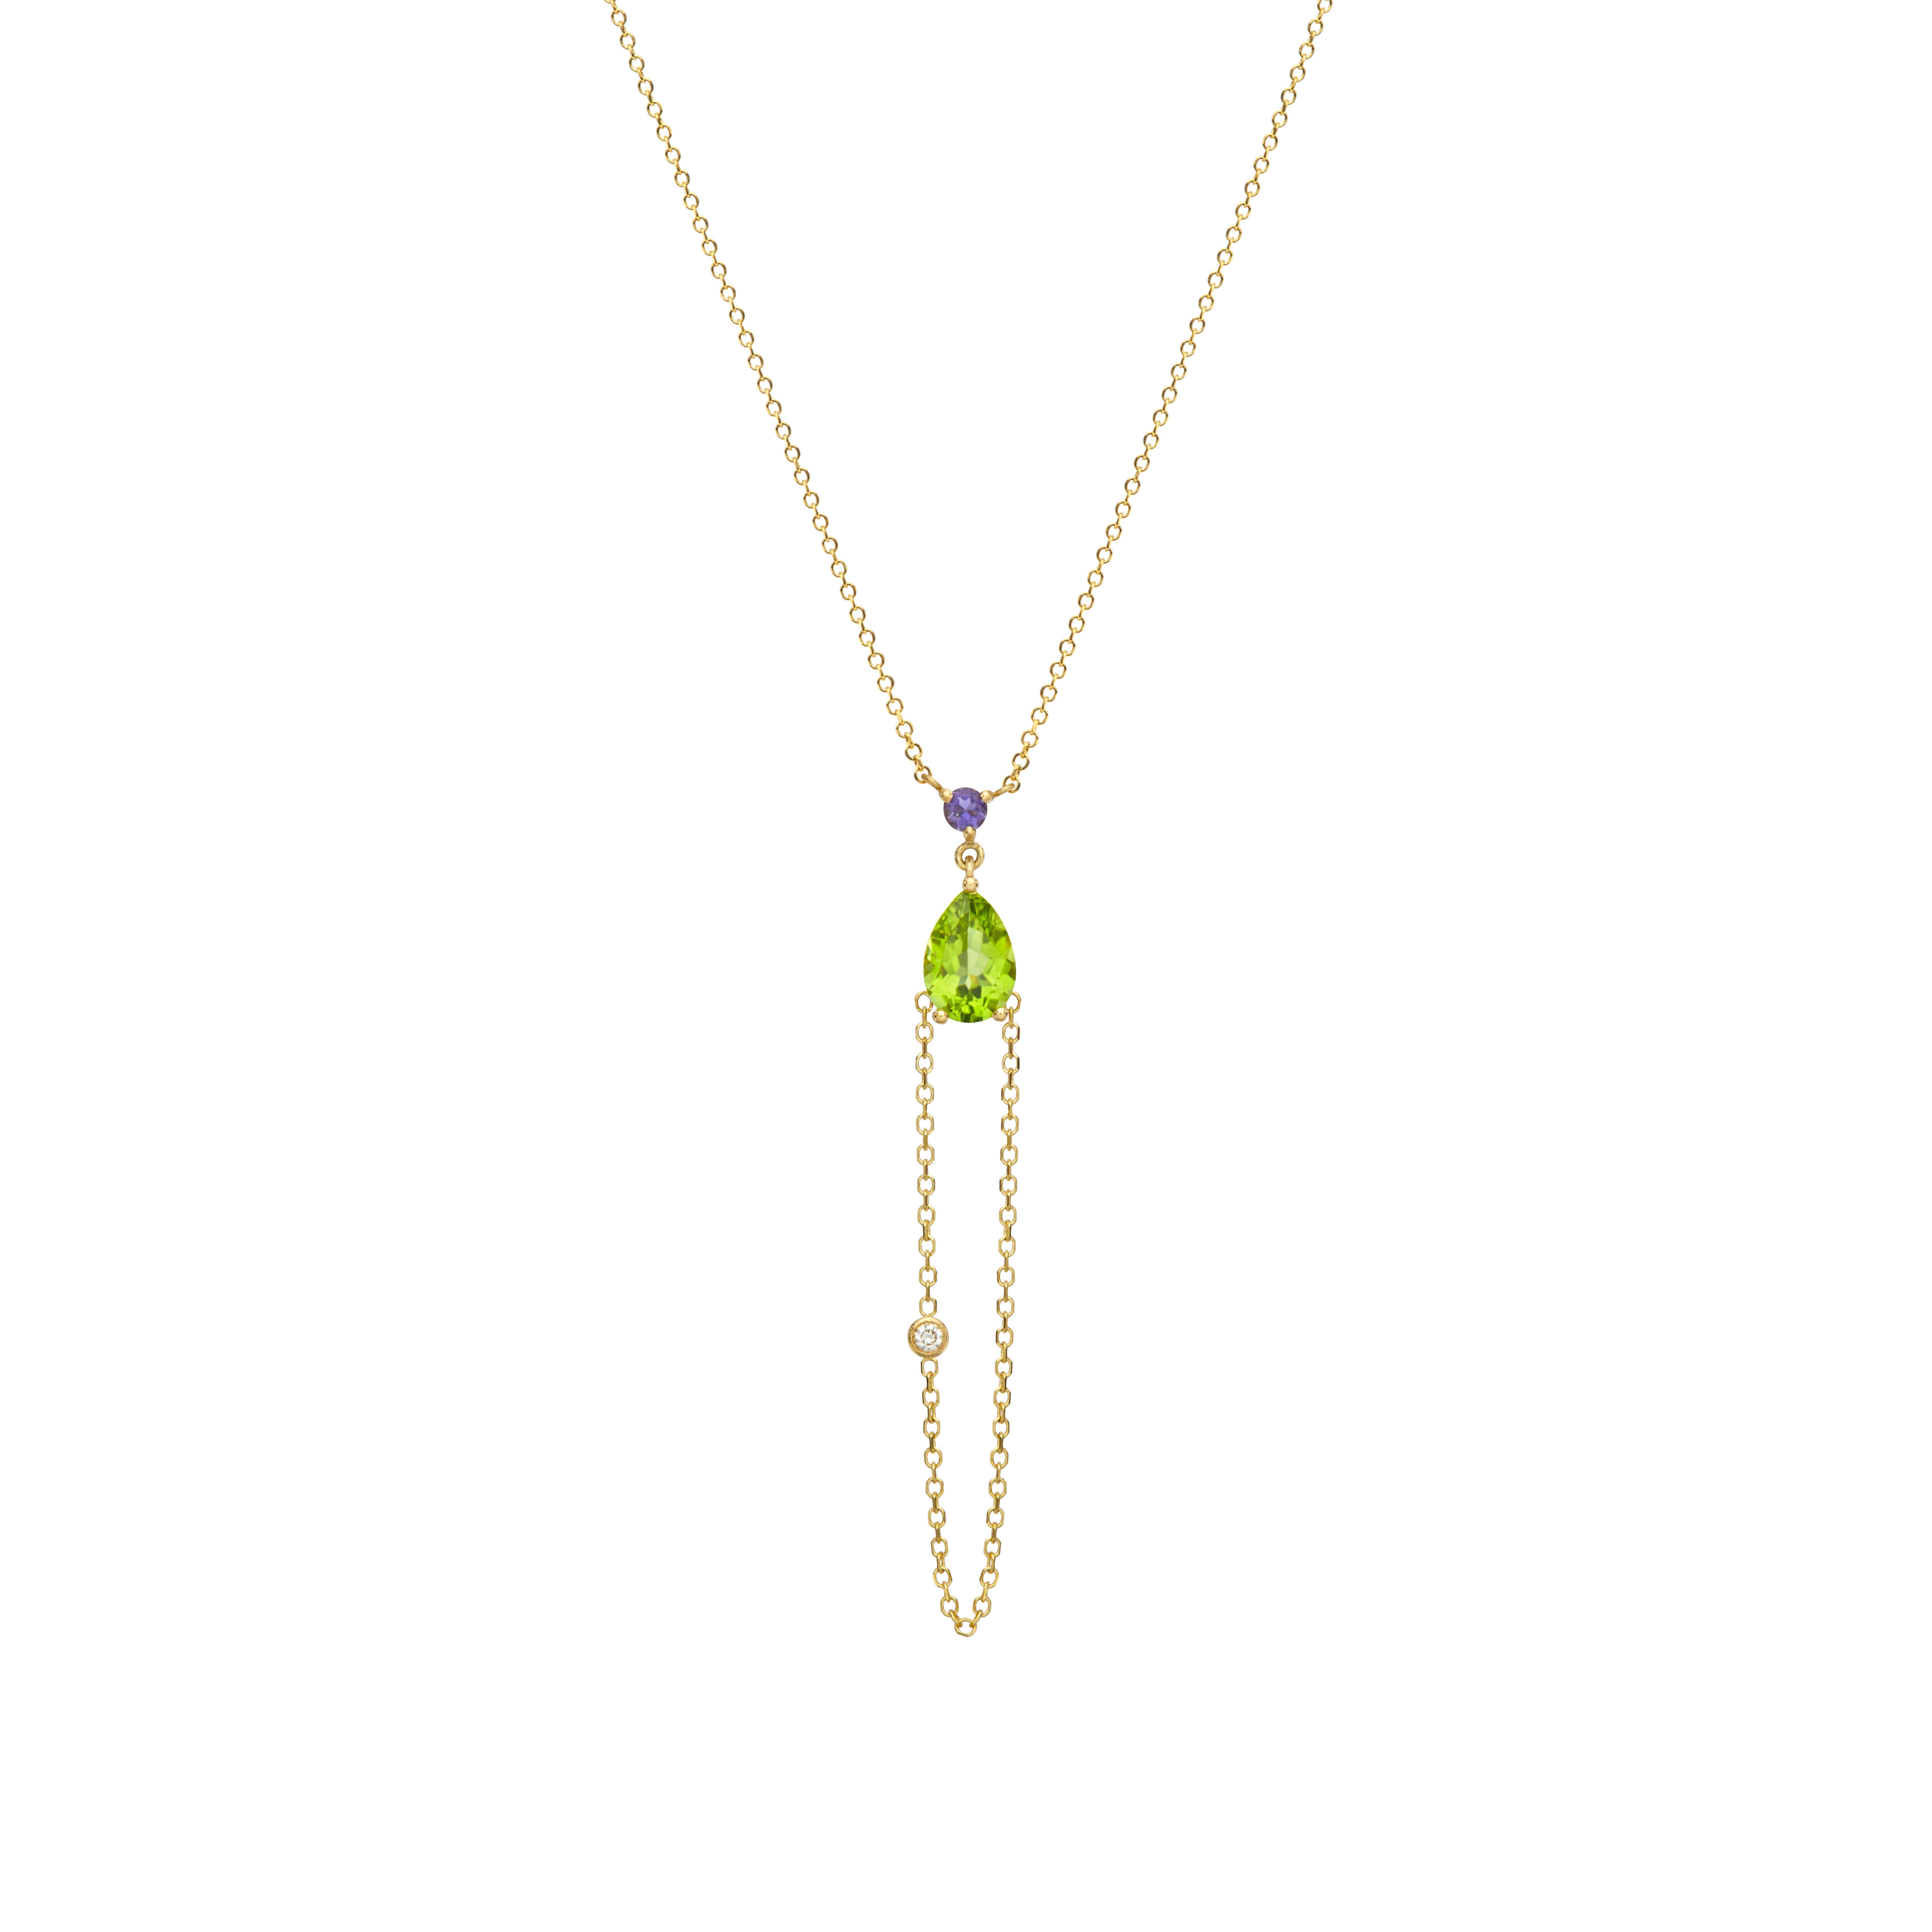 Mini Hanging Chain Pendant Necklace in 18Kt Gold with Peridot Iolitite Diamond